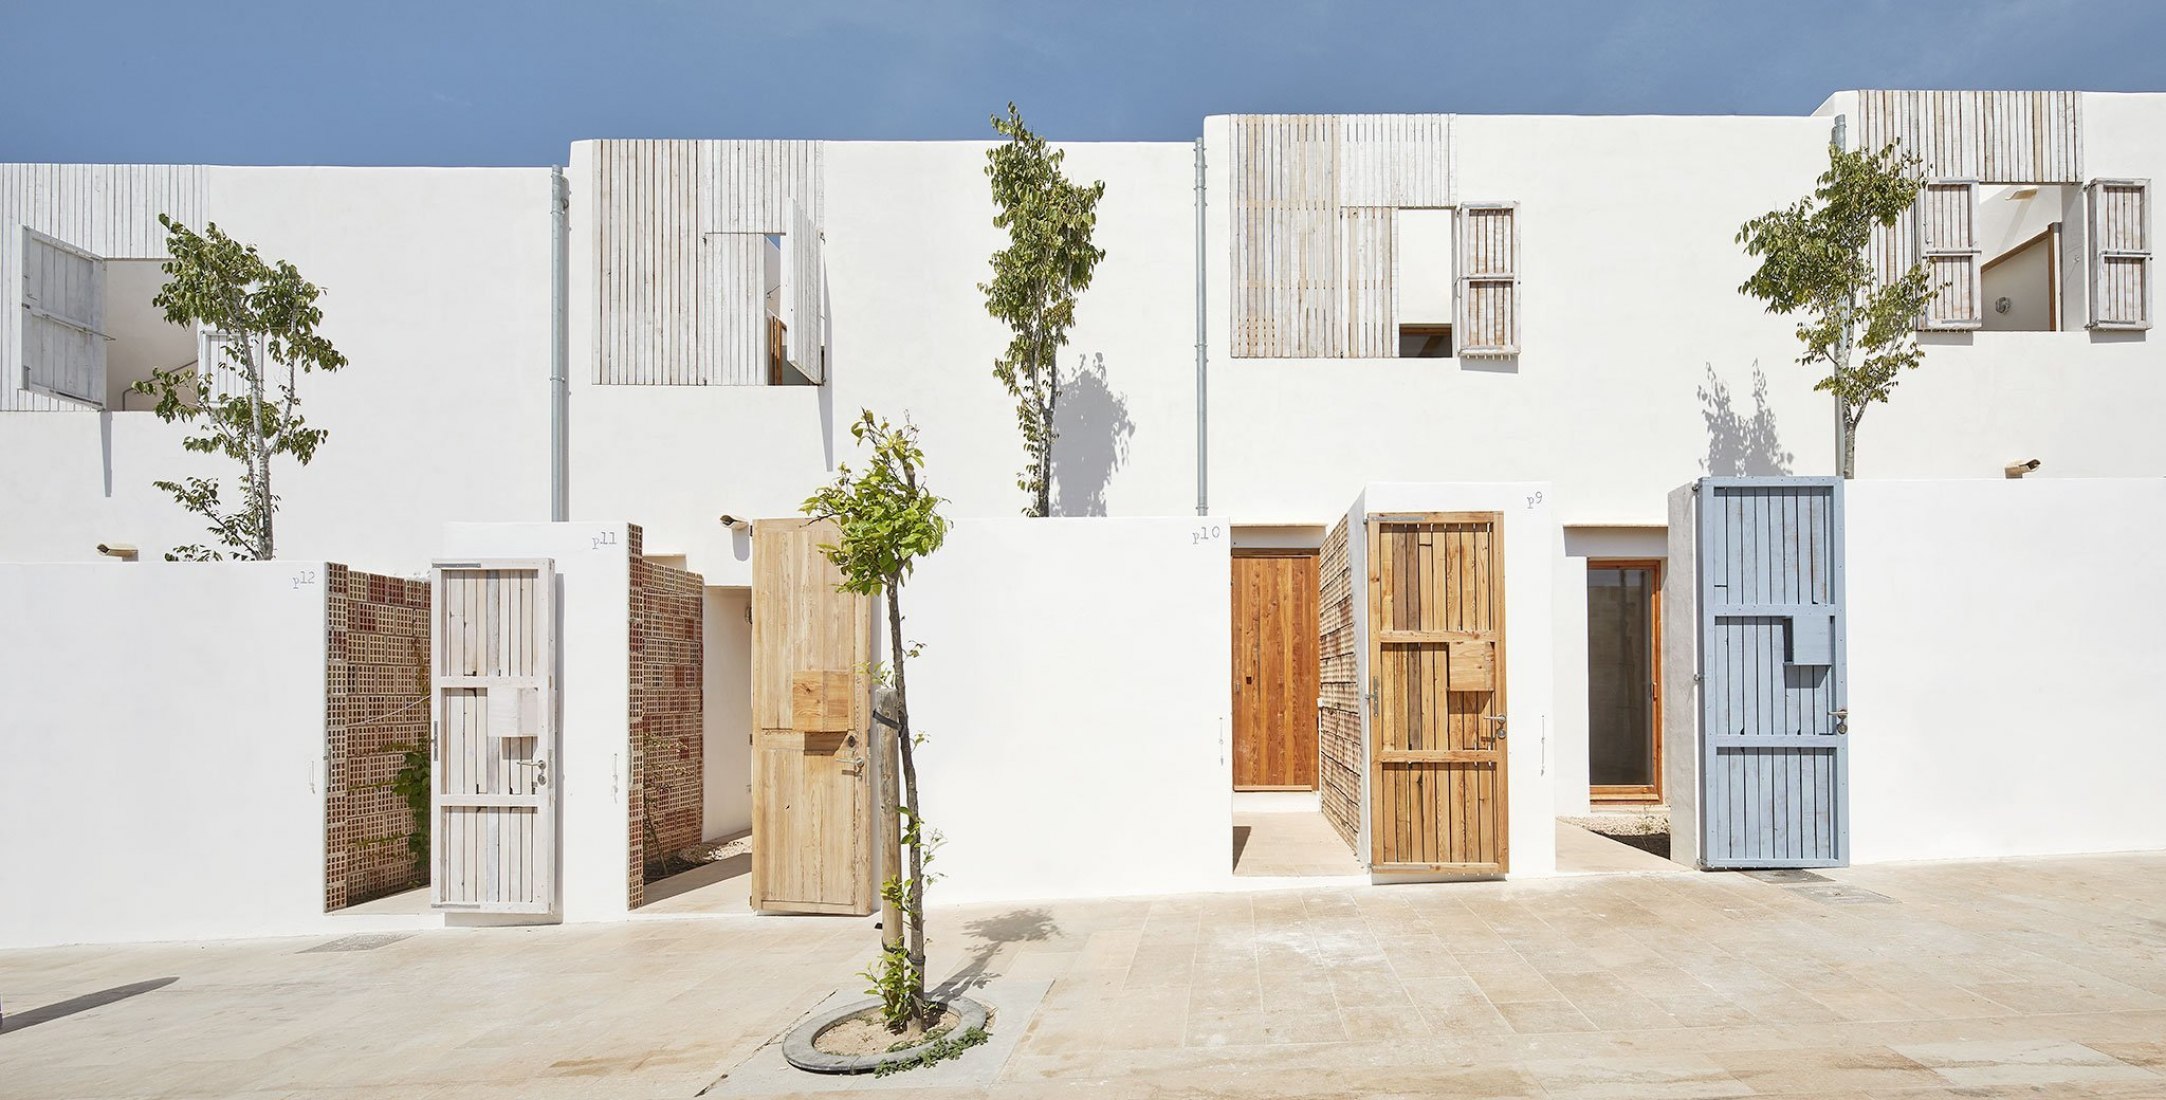 Exterior view. Social housing in Formentera. Climate Change Adaptation project funded by the European Union. Photograph by José Hevia